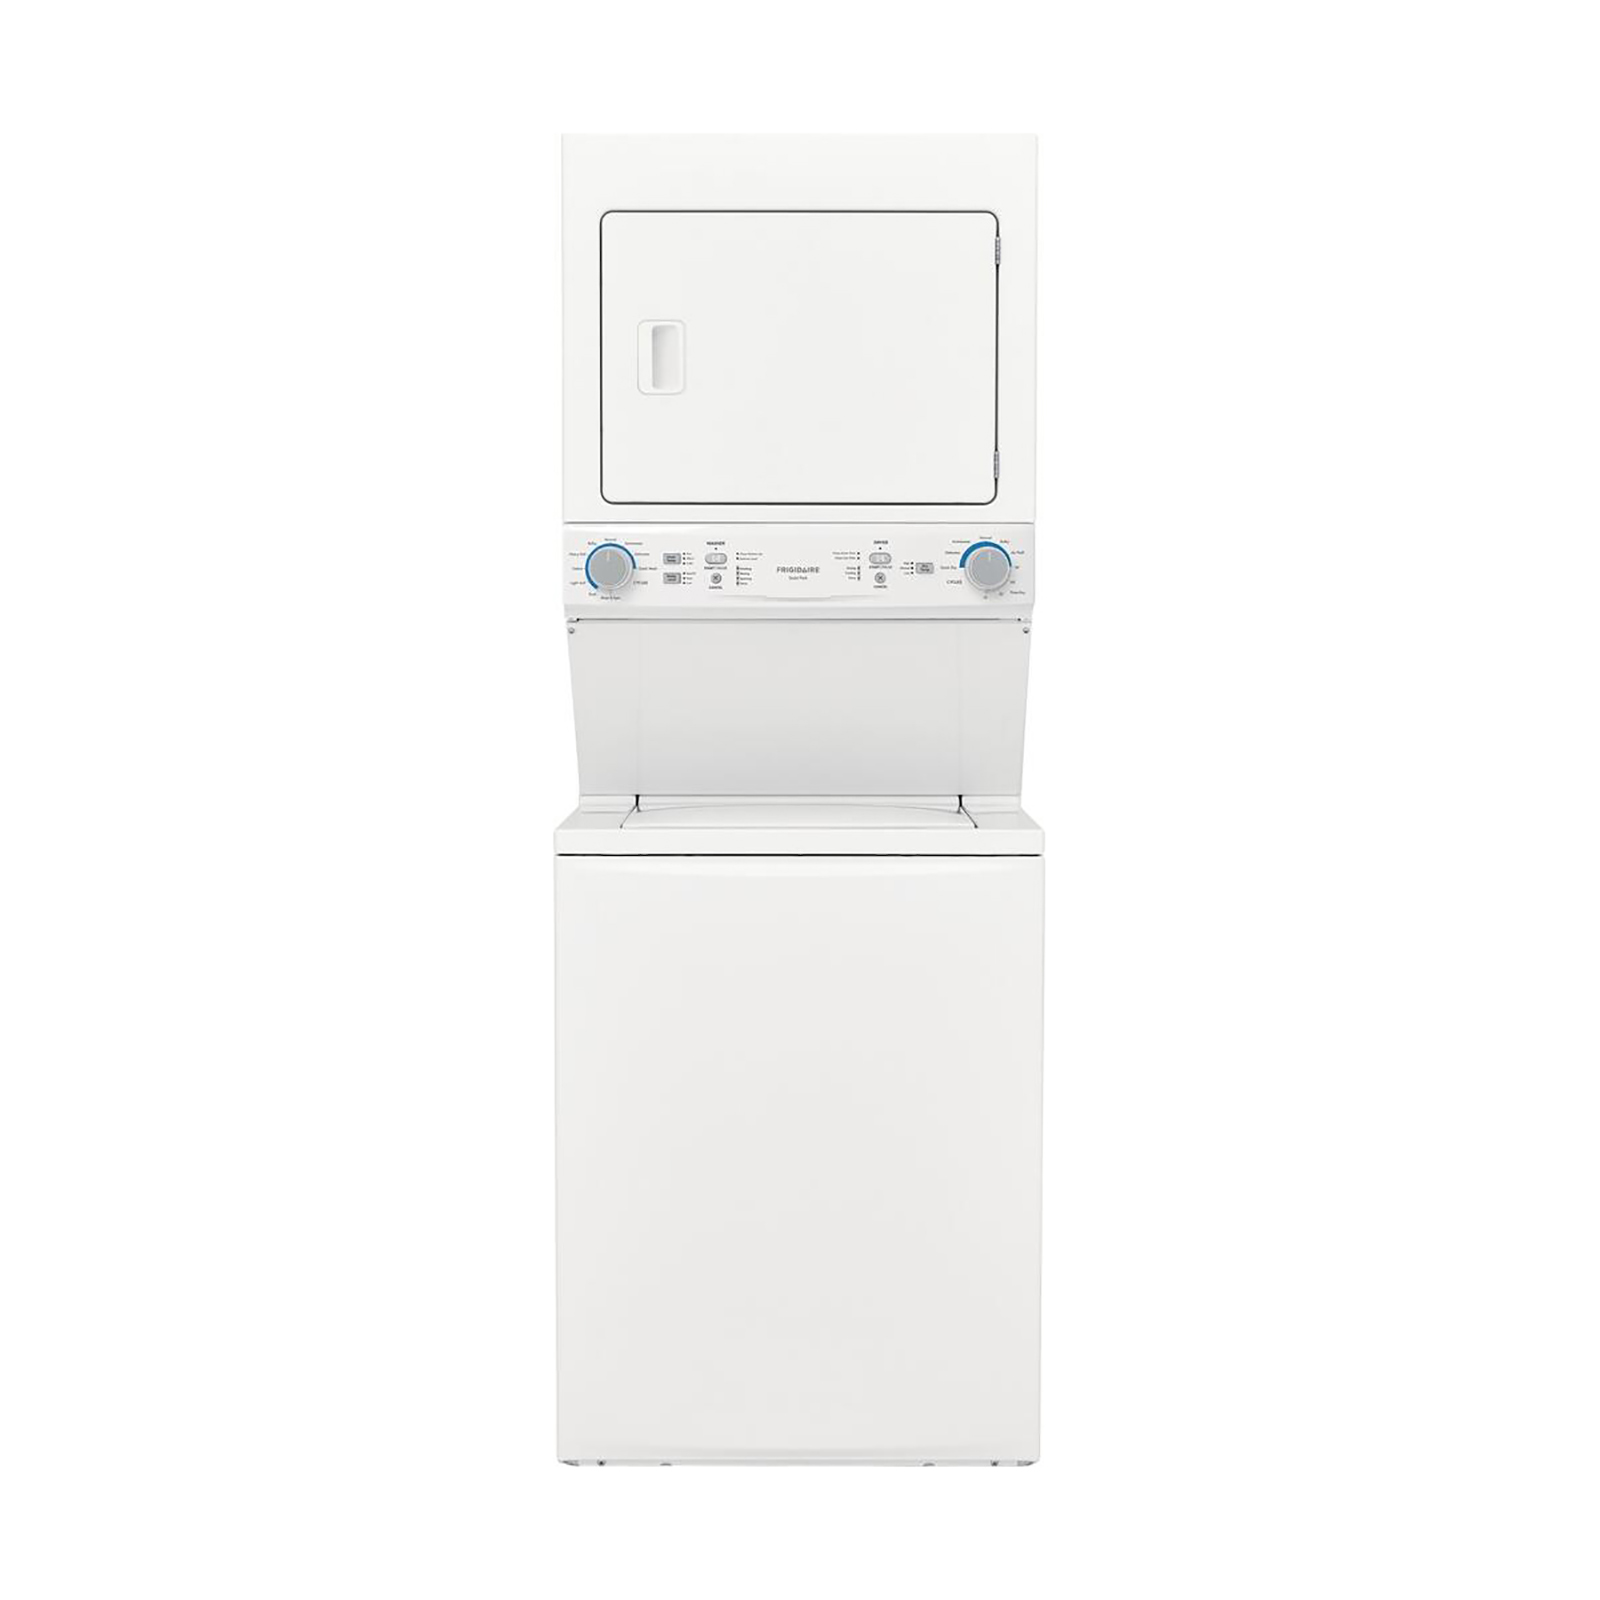 Frigidaire FLCE7522AW Stacked 3.9cu. ft. Washer and 5.6cu. ft. Dryer - White